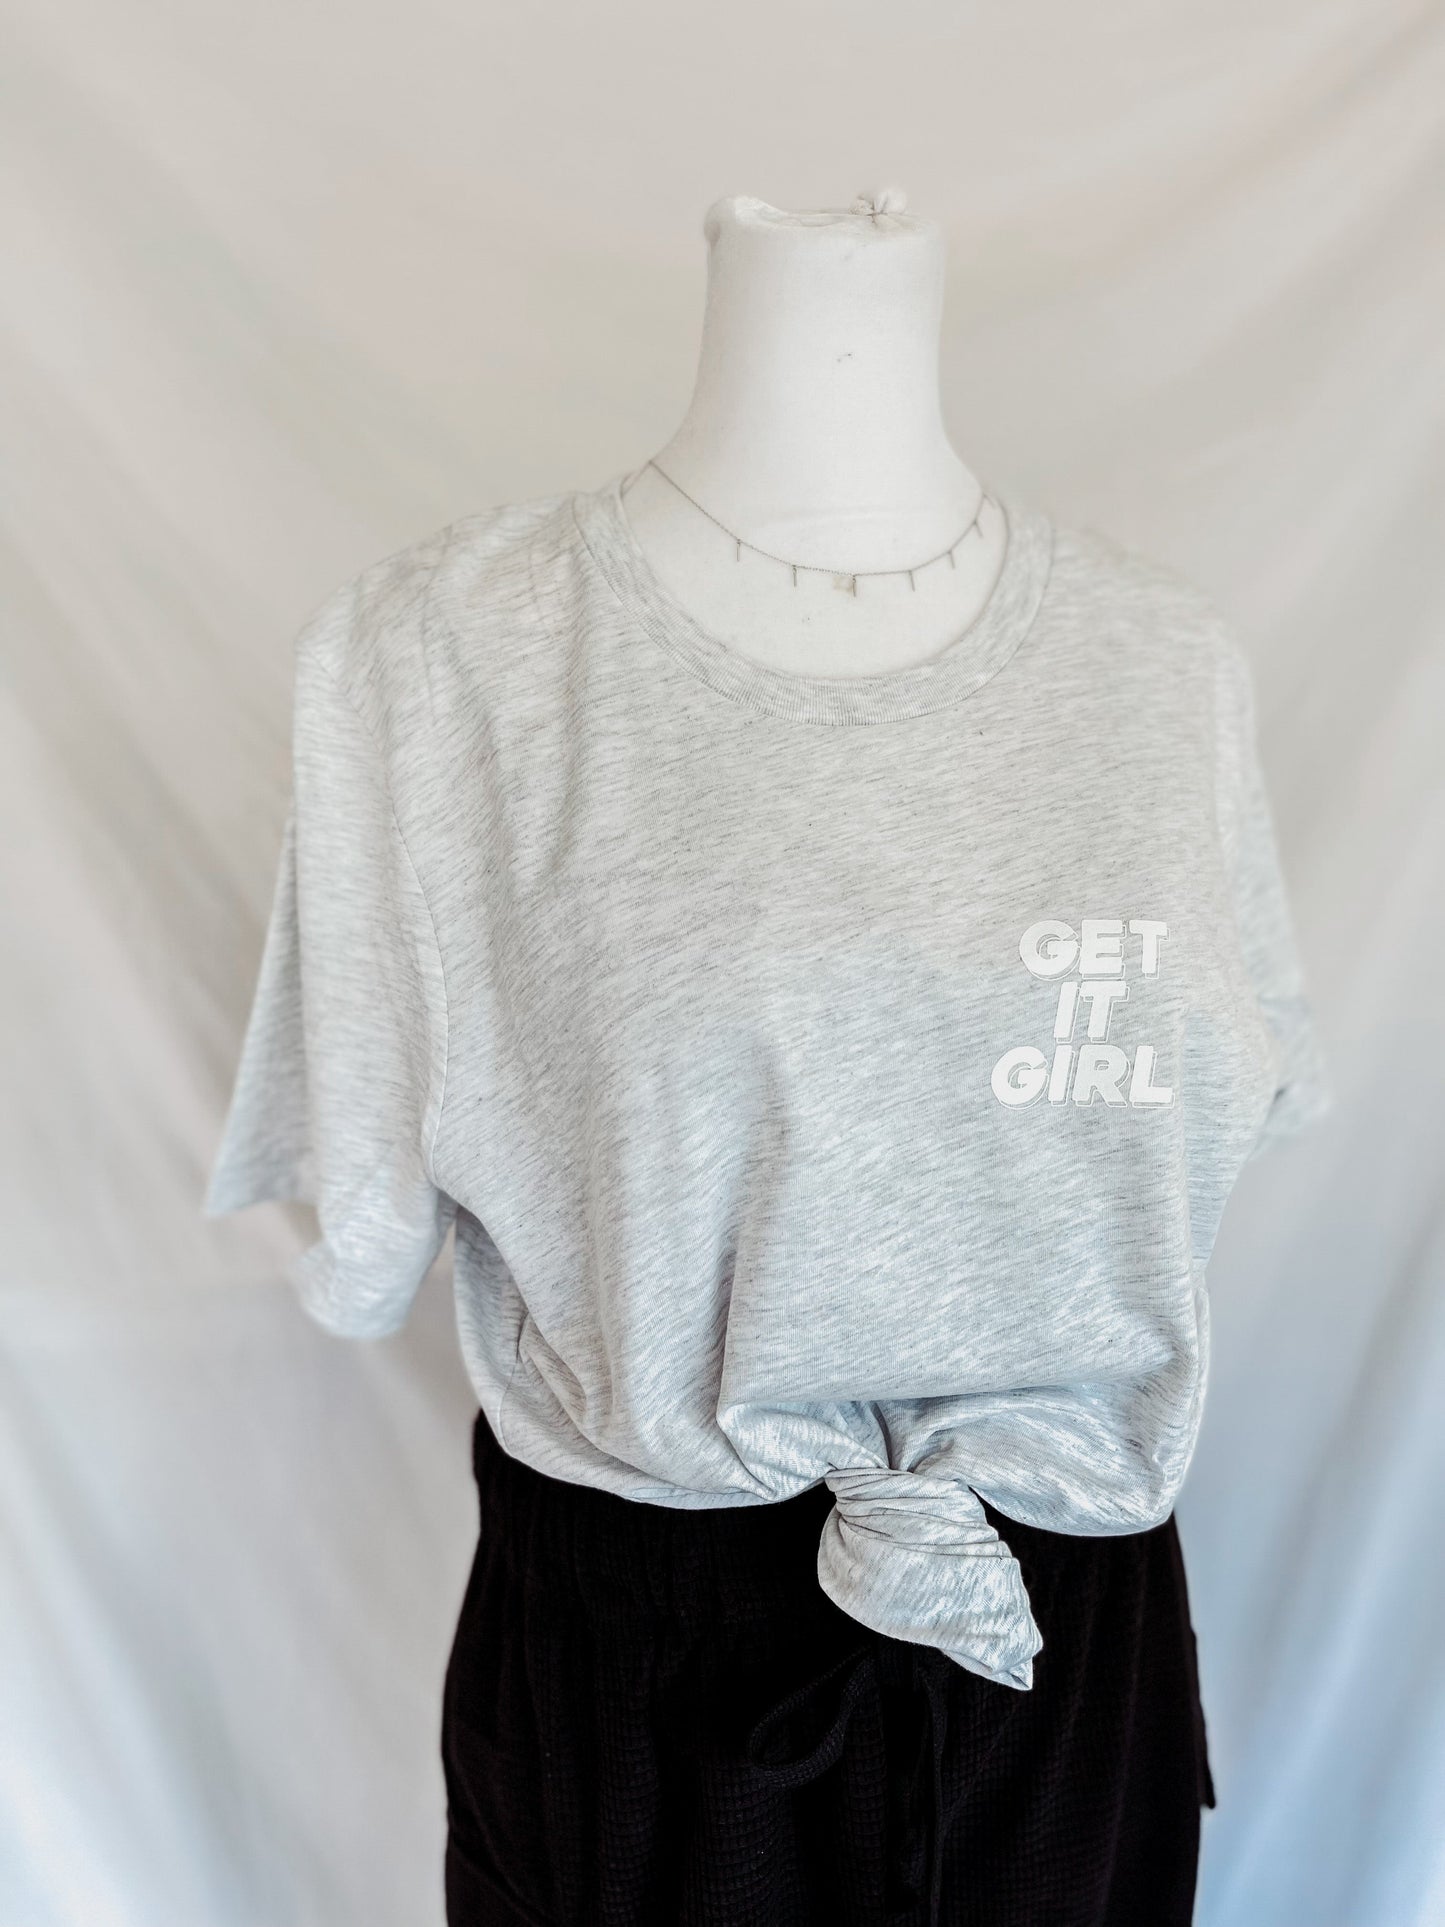 Get It Girl Graphic - MADE TO ORDER